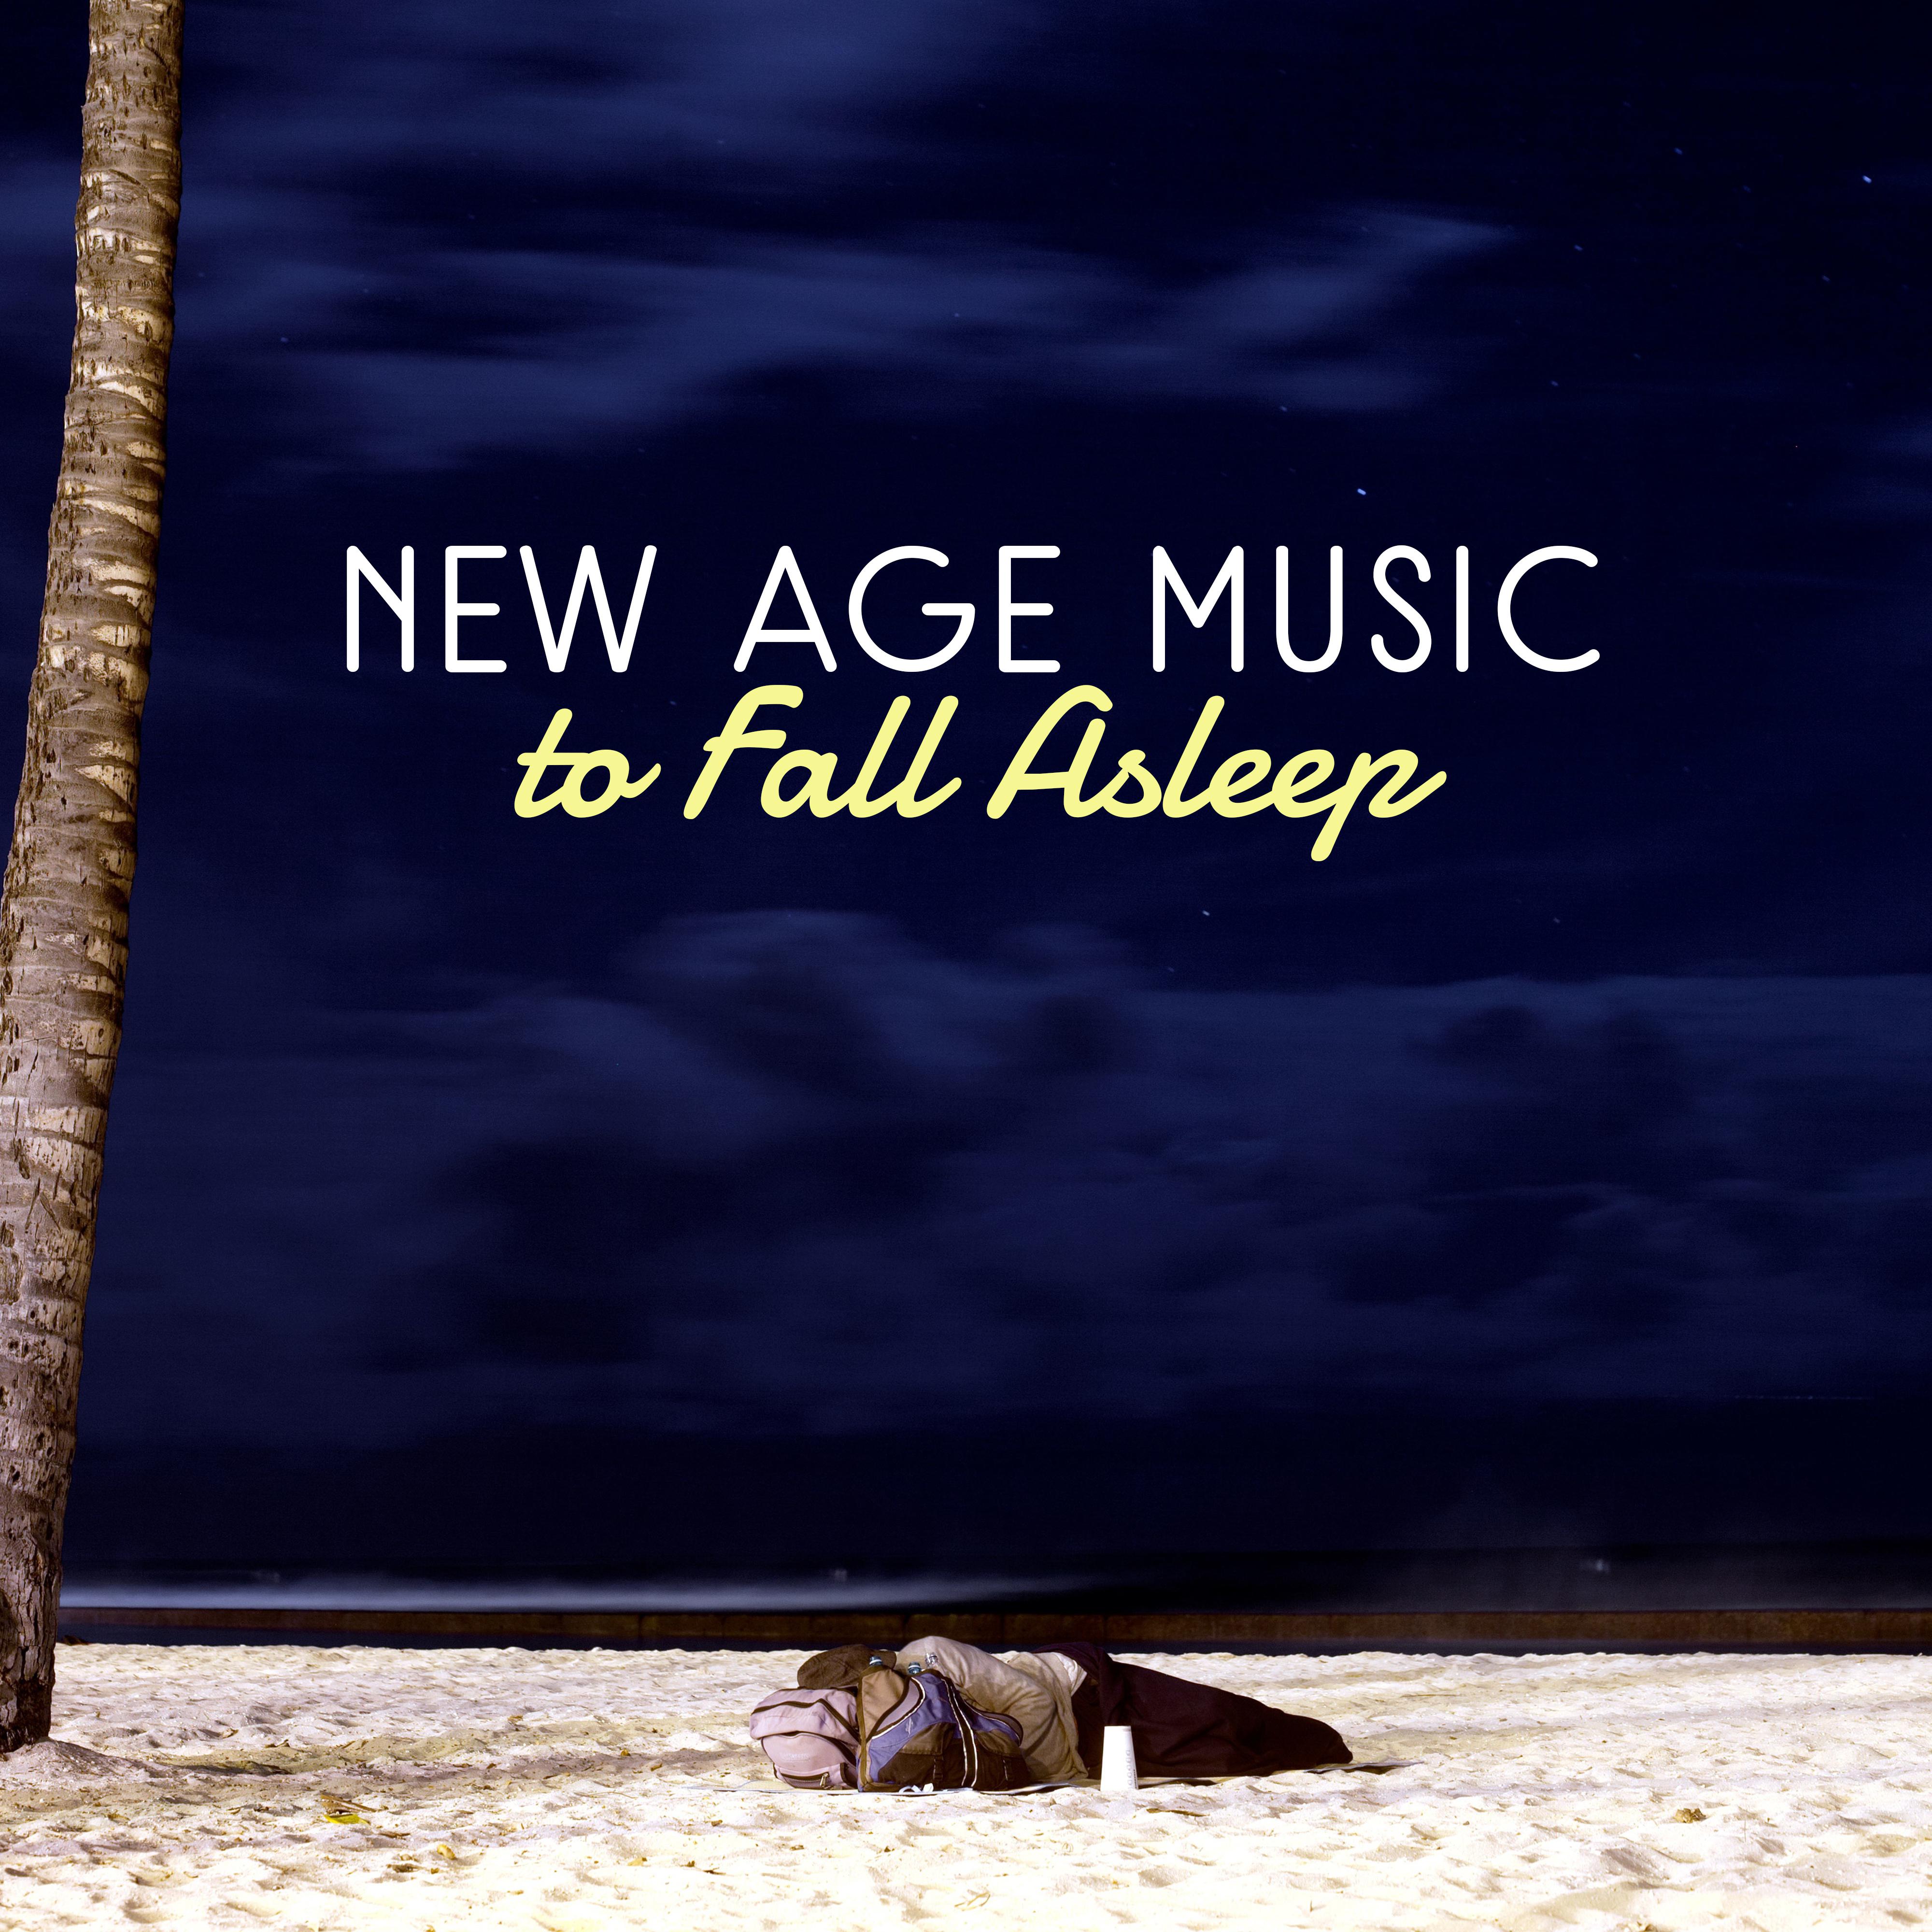 New Age Music to Fall Asleep – Relief Stress with Soft Sounds, Sleep & Relax, Inner Calmness